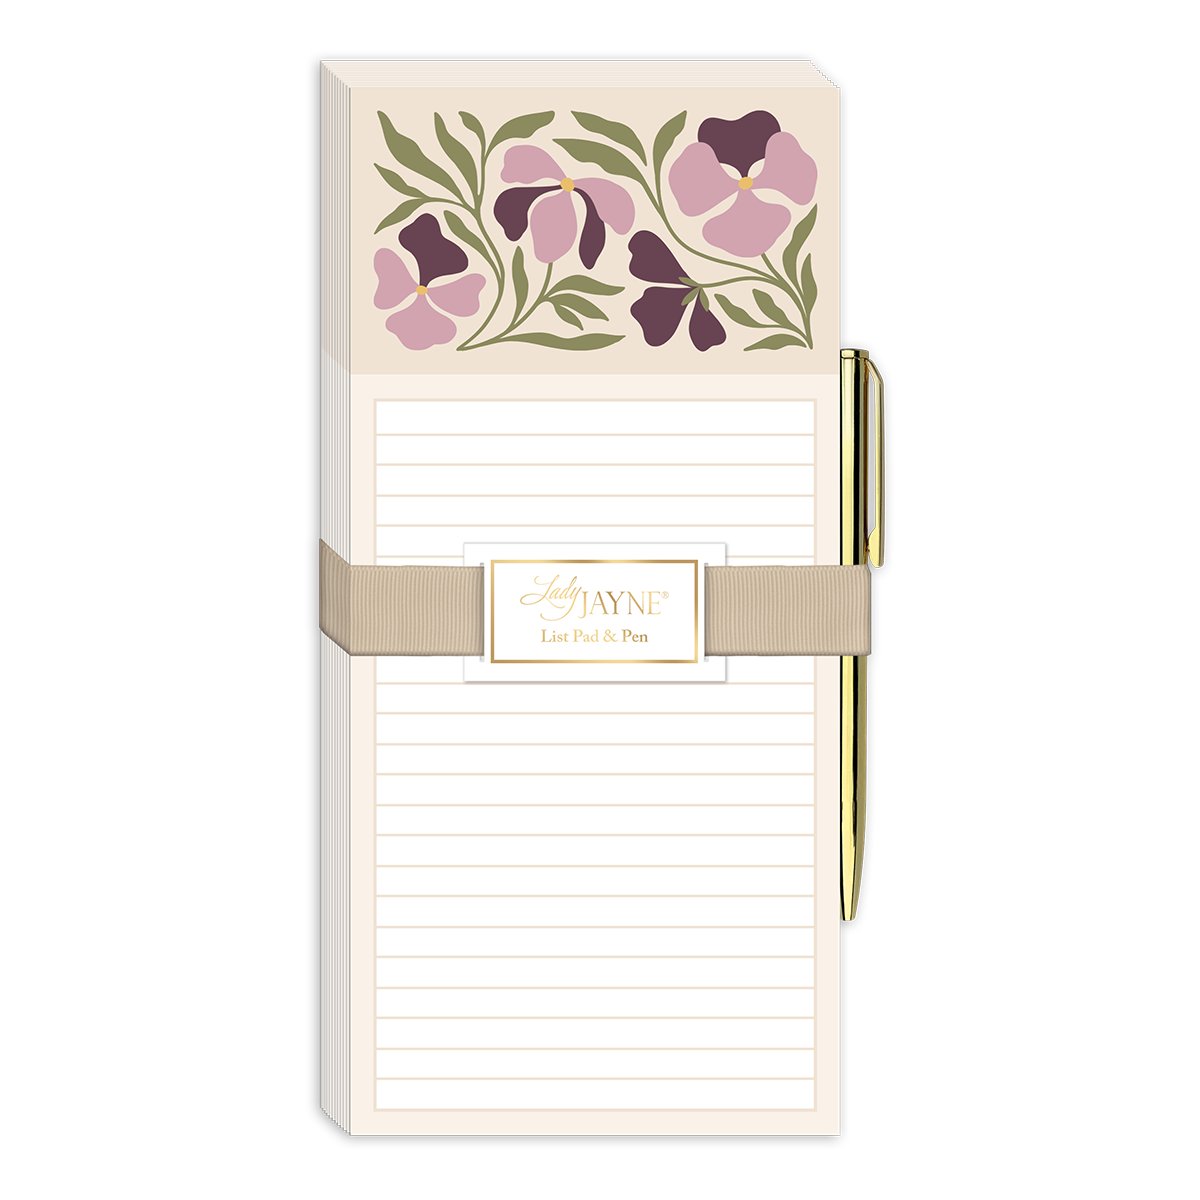 Flower Market Pansy Magnetic List Pad With Pen Product